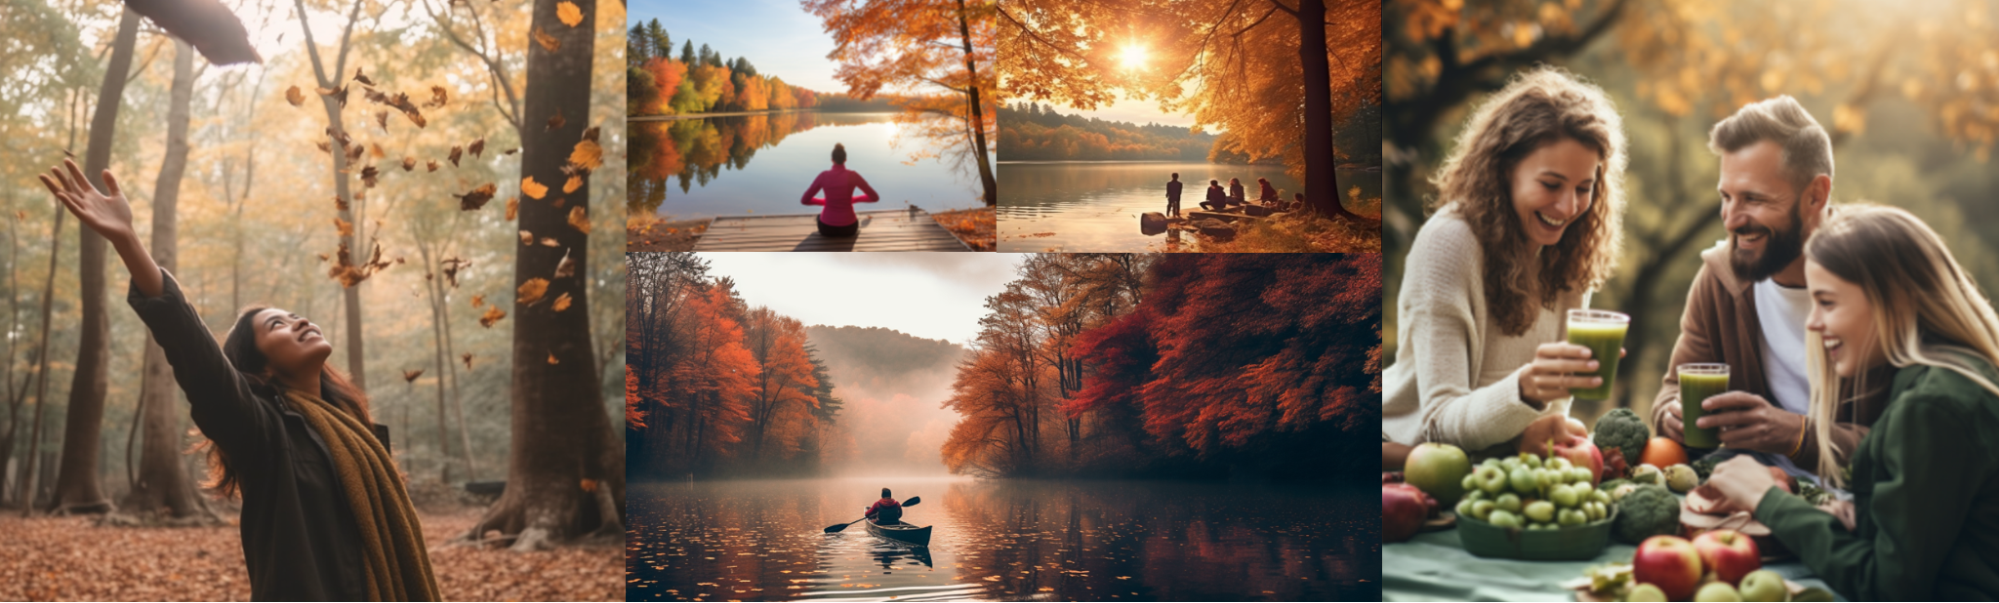 A collage of people engaging in different autumn activities: a woman admiring the falling leaves, one woman meditating, another kayaking, a group of friends by the lake, and a family enjoying a super greens drink